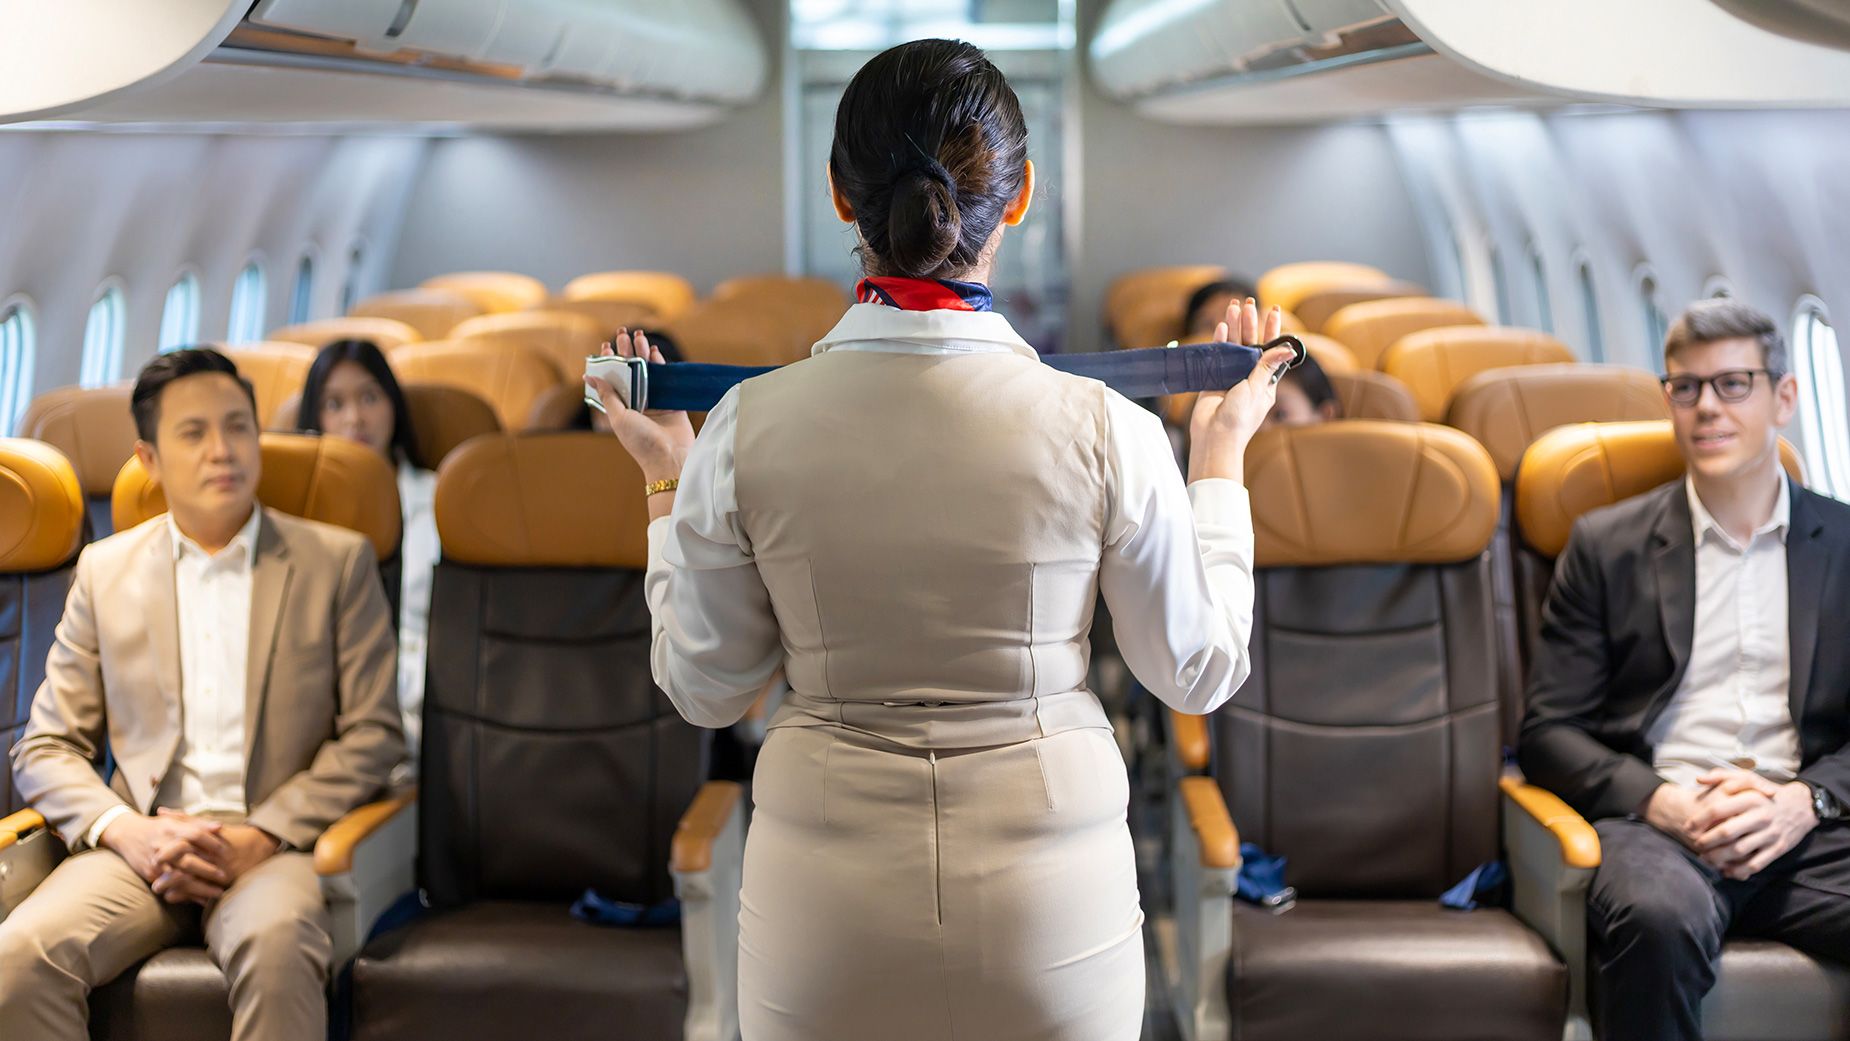 Flying Safe: Why Flight Attendants Want Your Attention